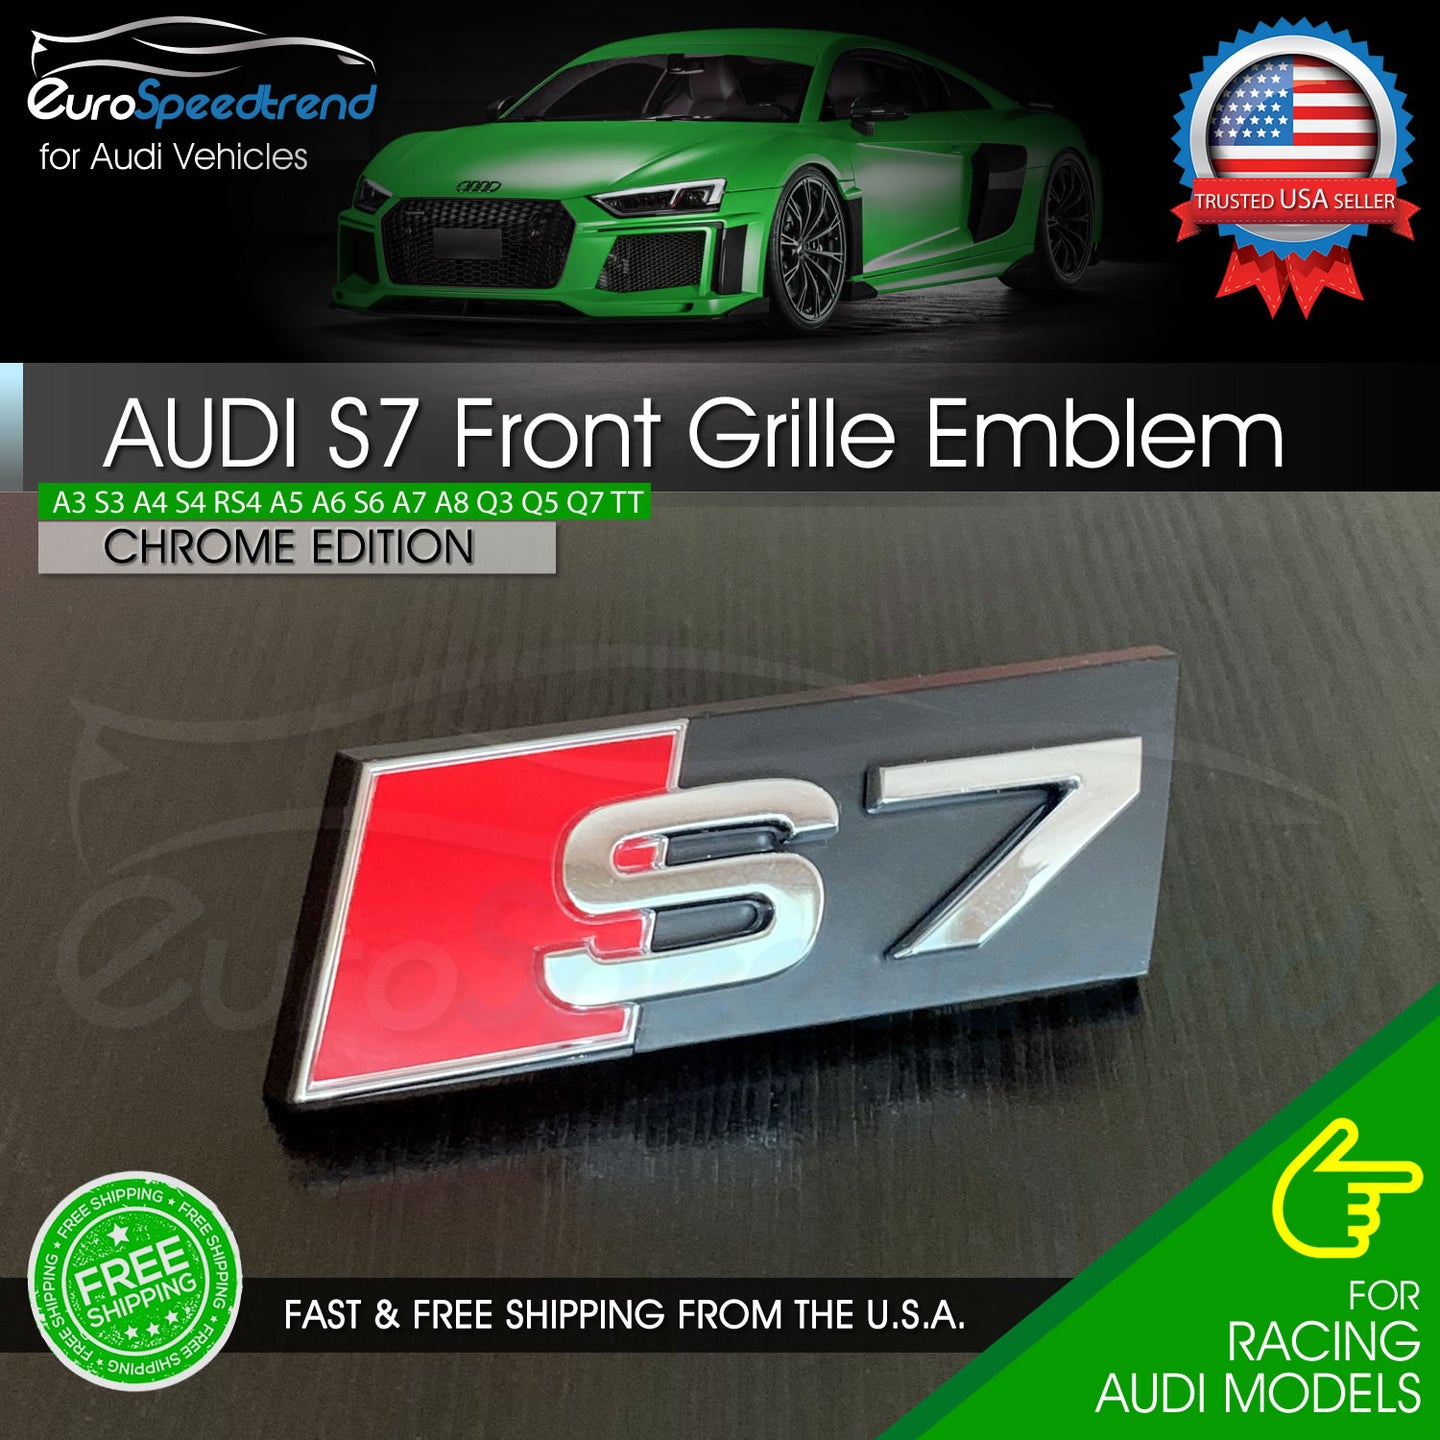 Audi S7 Front Grill Emblem Chrome fit A7 S7 Hood Grille Badge Nameplate OE